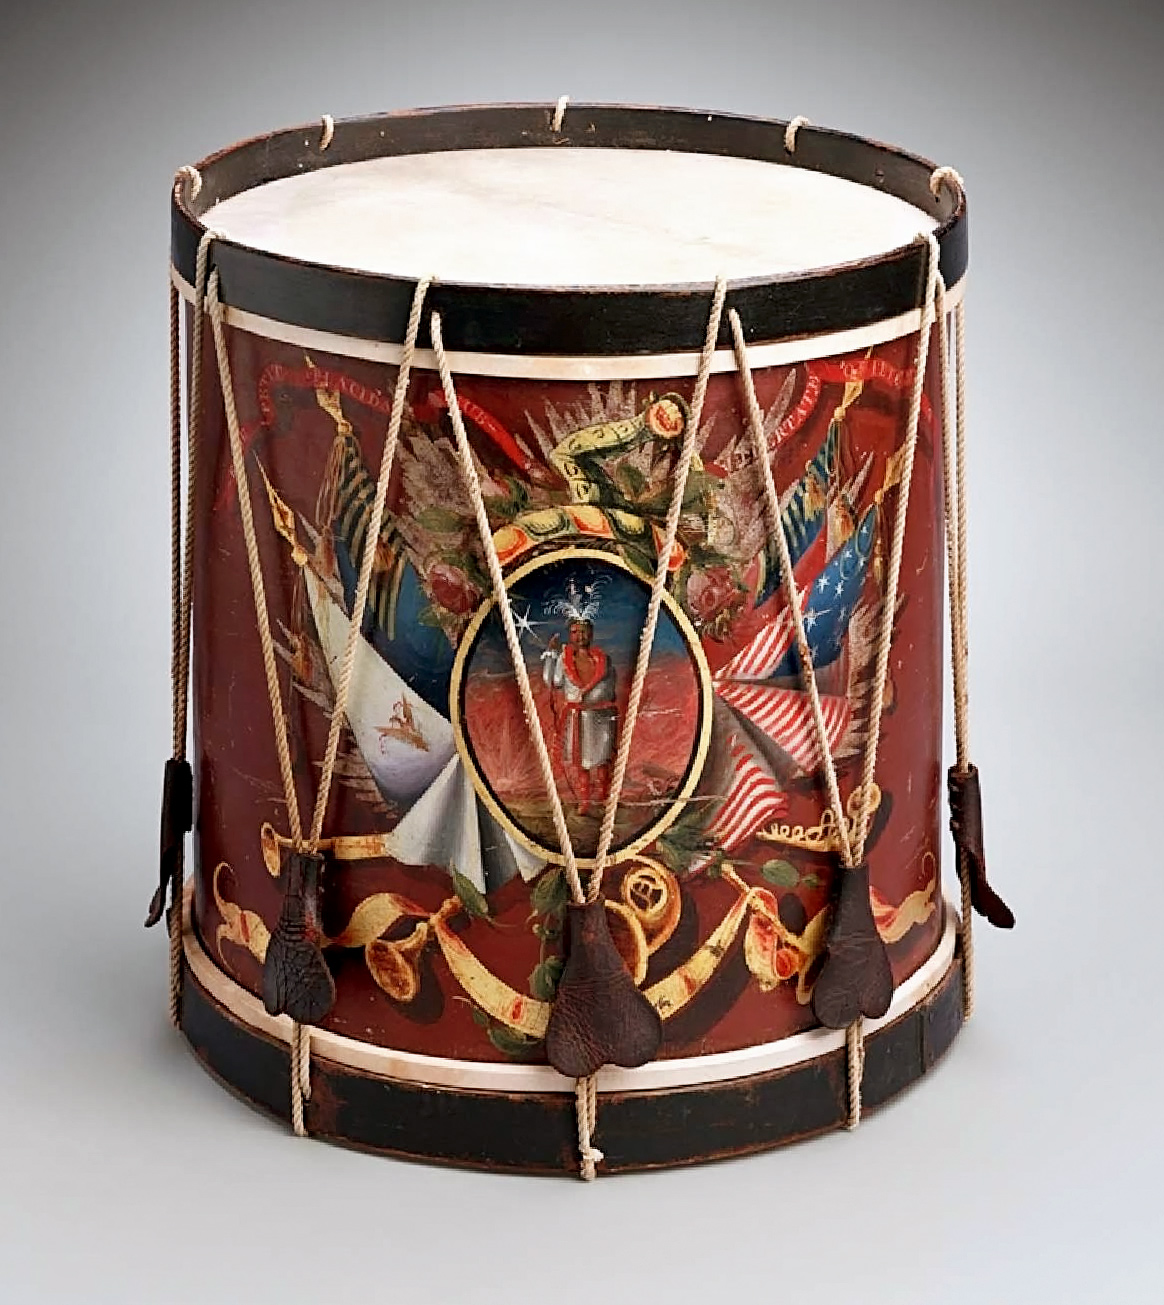 Probably painted by Charles Hubbard (1801–1876), side drum, Boston, Massachusetts, 1824.